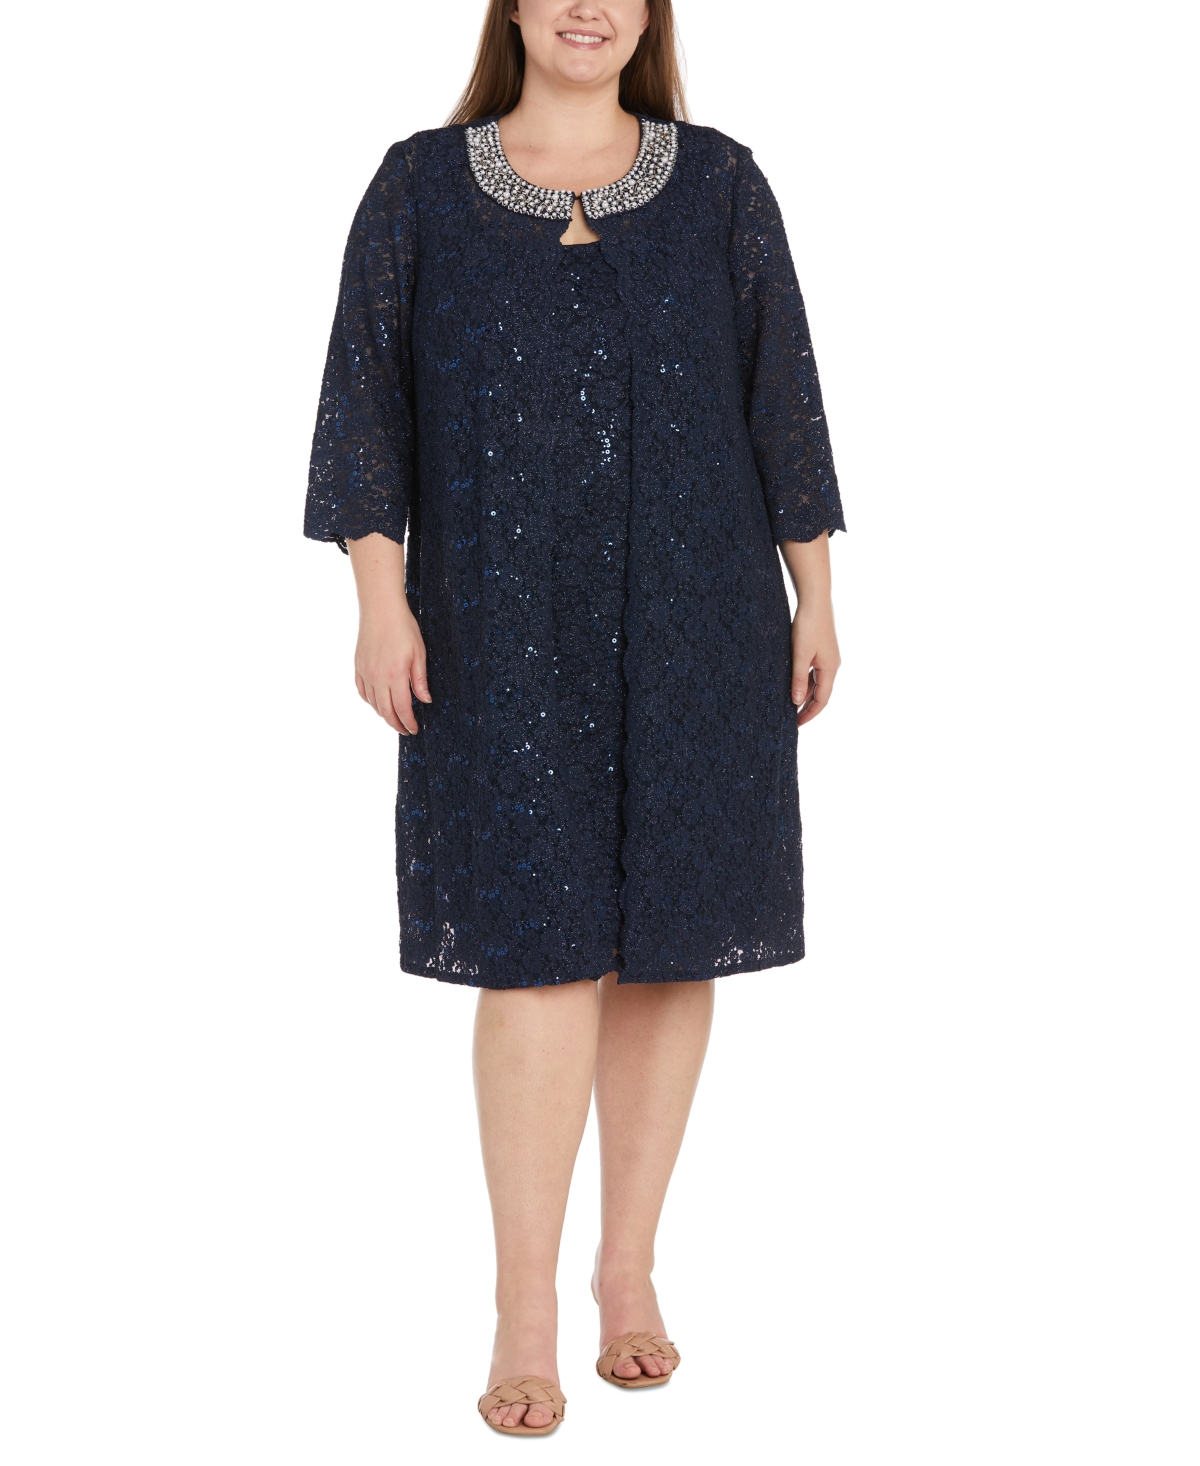 1960s Mad Men Dresses and Clothing Styles R  M Richards Plus Size 2-Pc. Sequined Beaded-Neck Shimmering Dress - Navy $149.00 AT vintagedancer.com